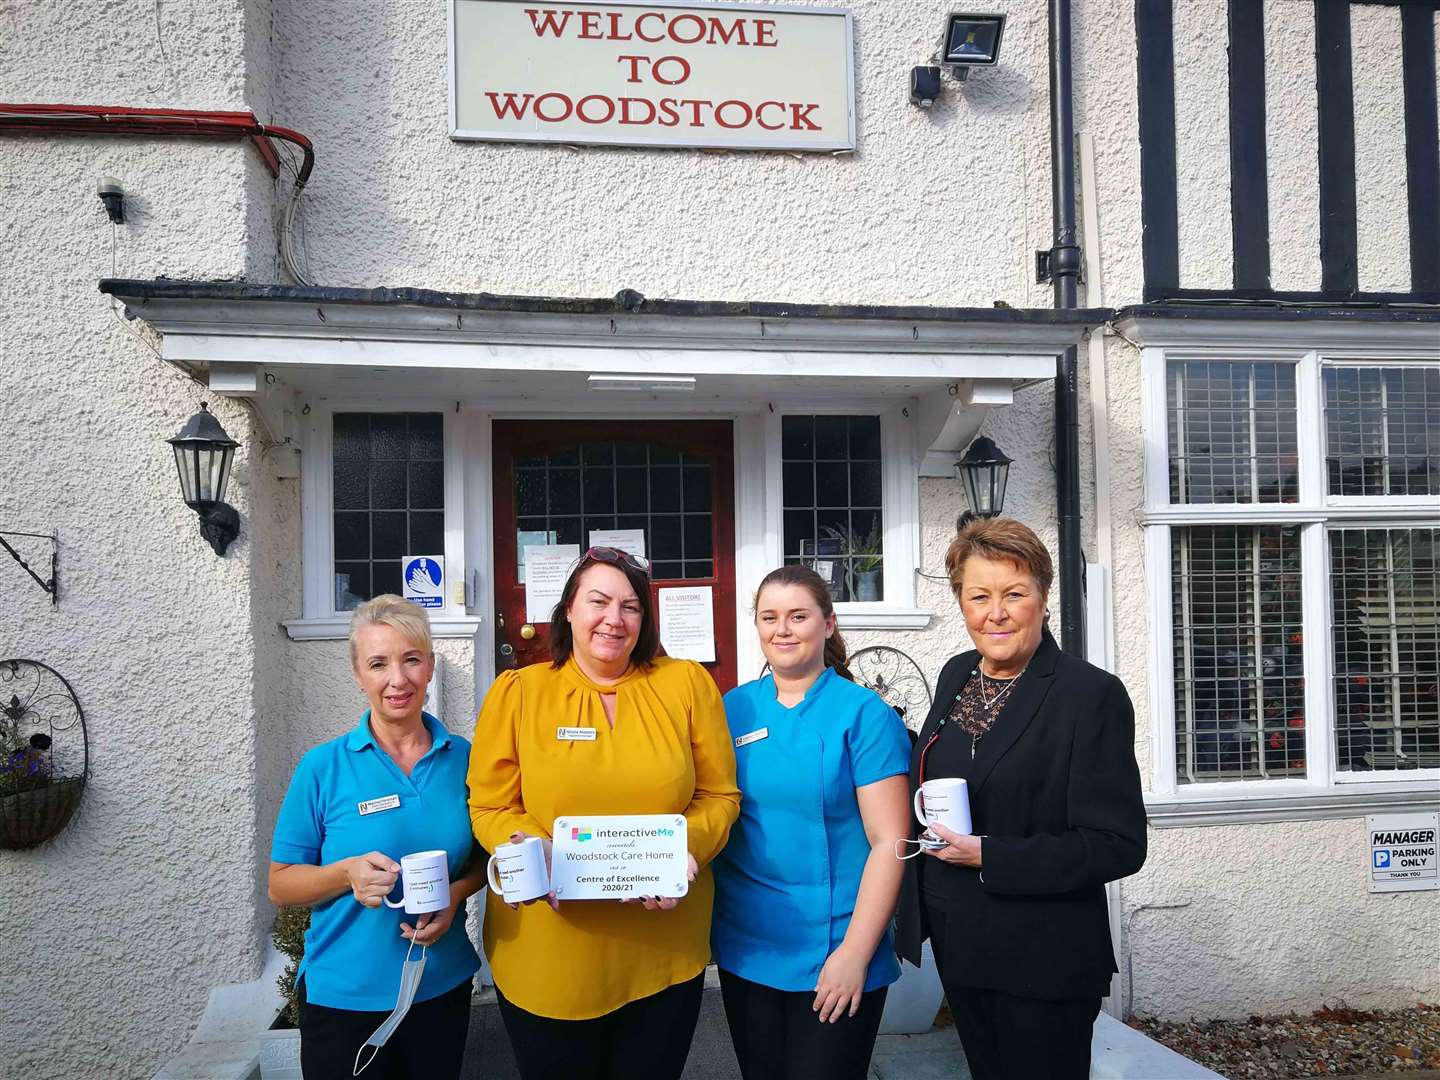 Marina Foreman, Nicola Masters, Lauren Walker, and Viv Stead from Nellsar at Woodstock Residential Care Centre